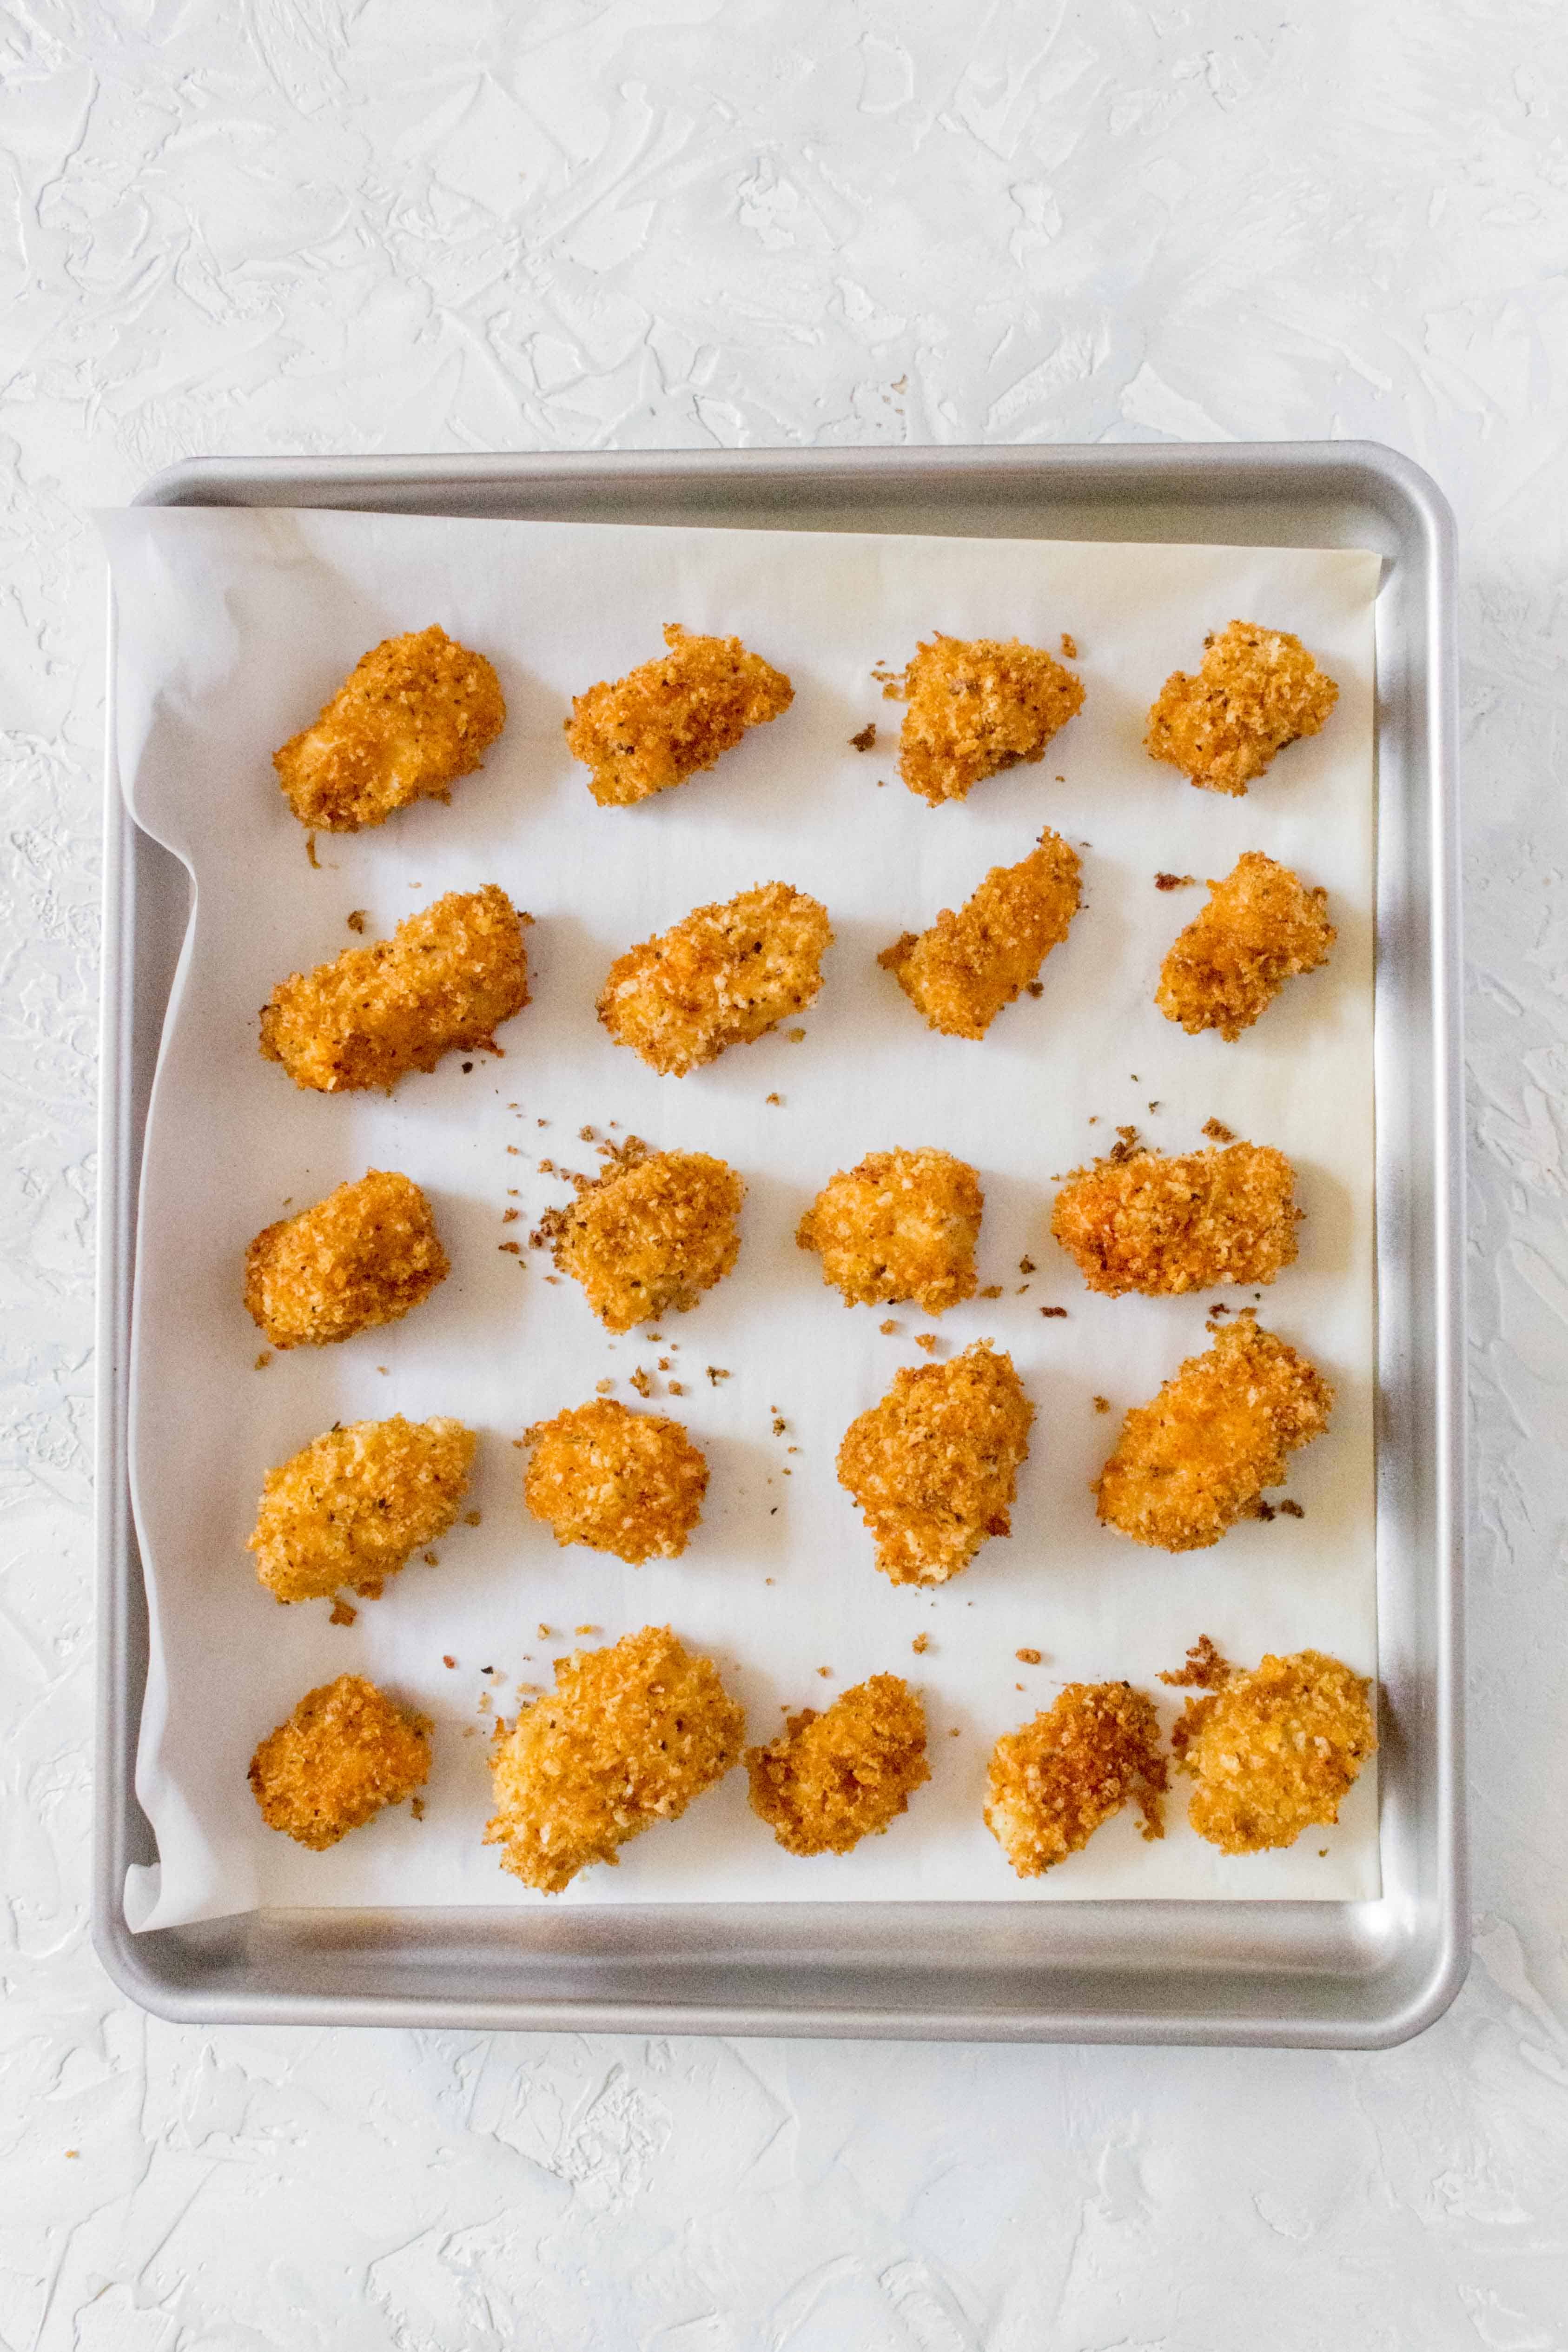 How To Make Homemade Chicken Nuggets